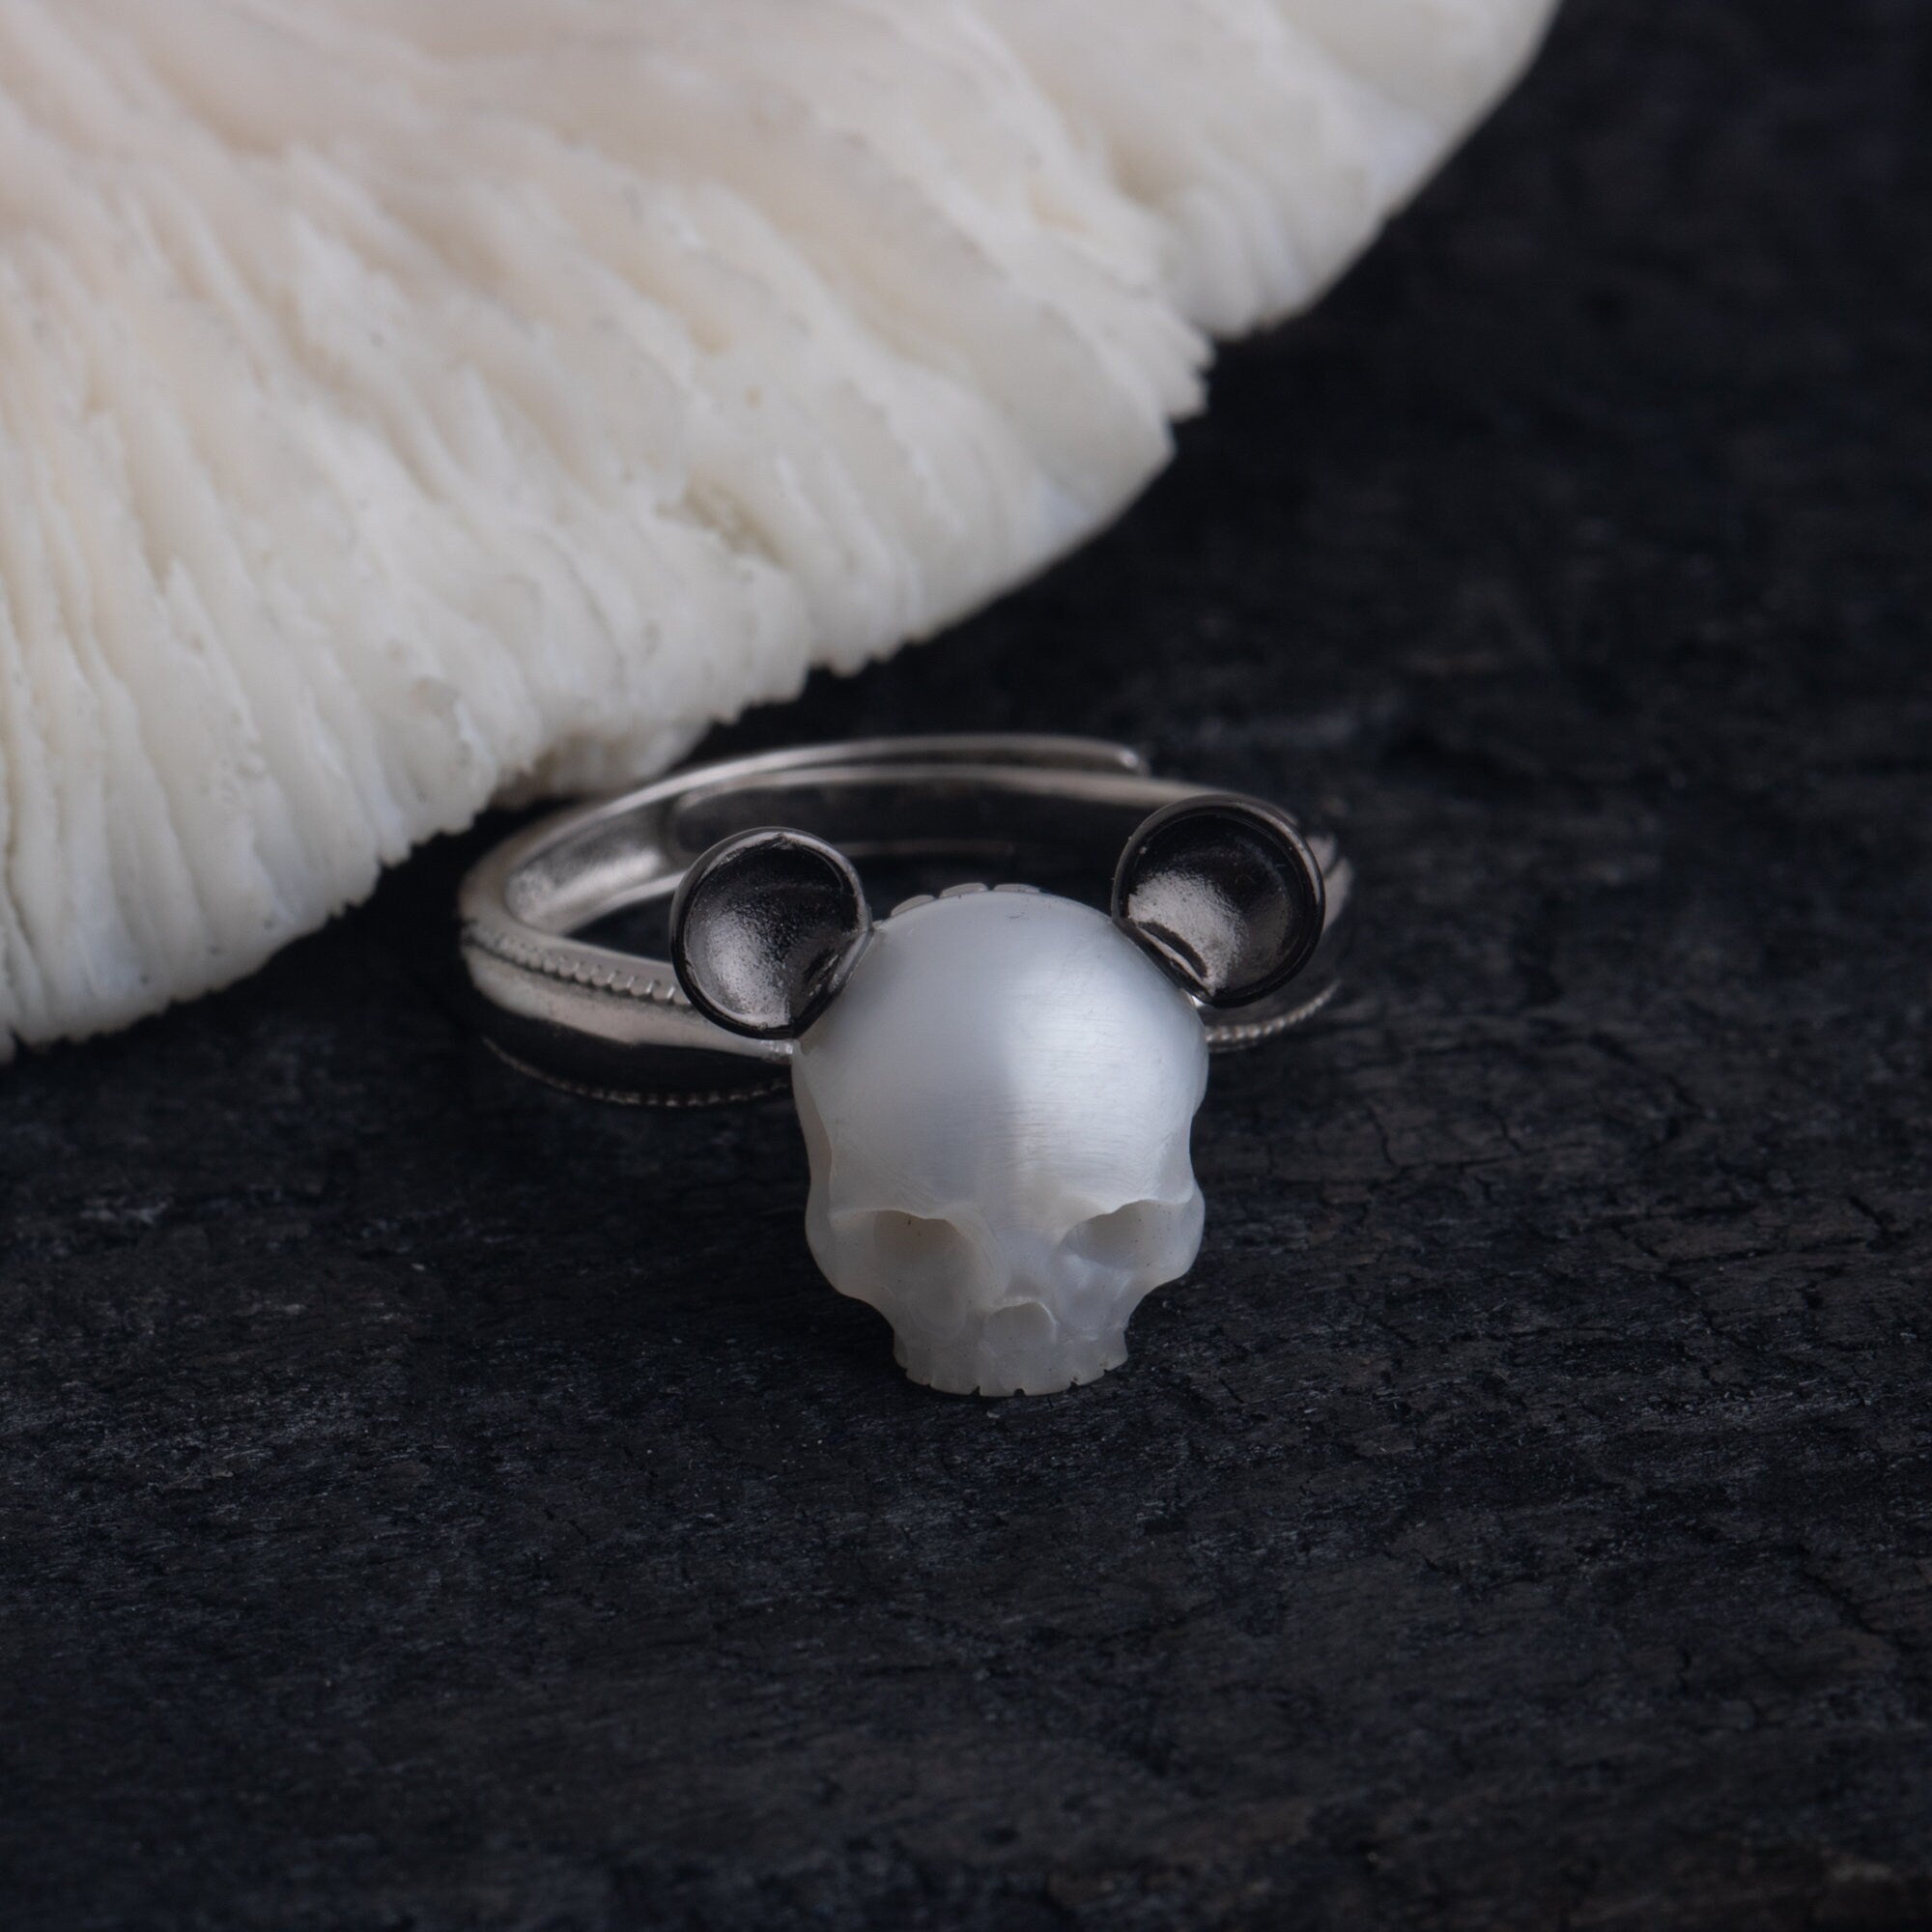 Mickey and Minnie Ring 925 silver skull carved pearl ring bear shape cute engagement ring and necklace gift for lover